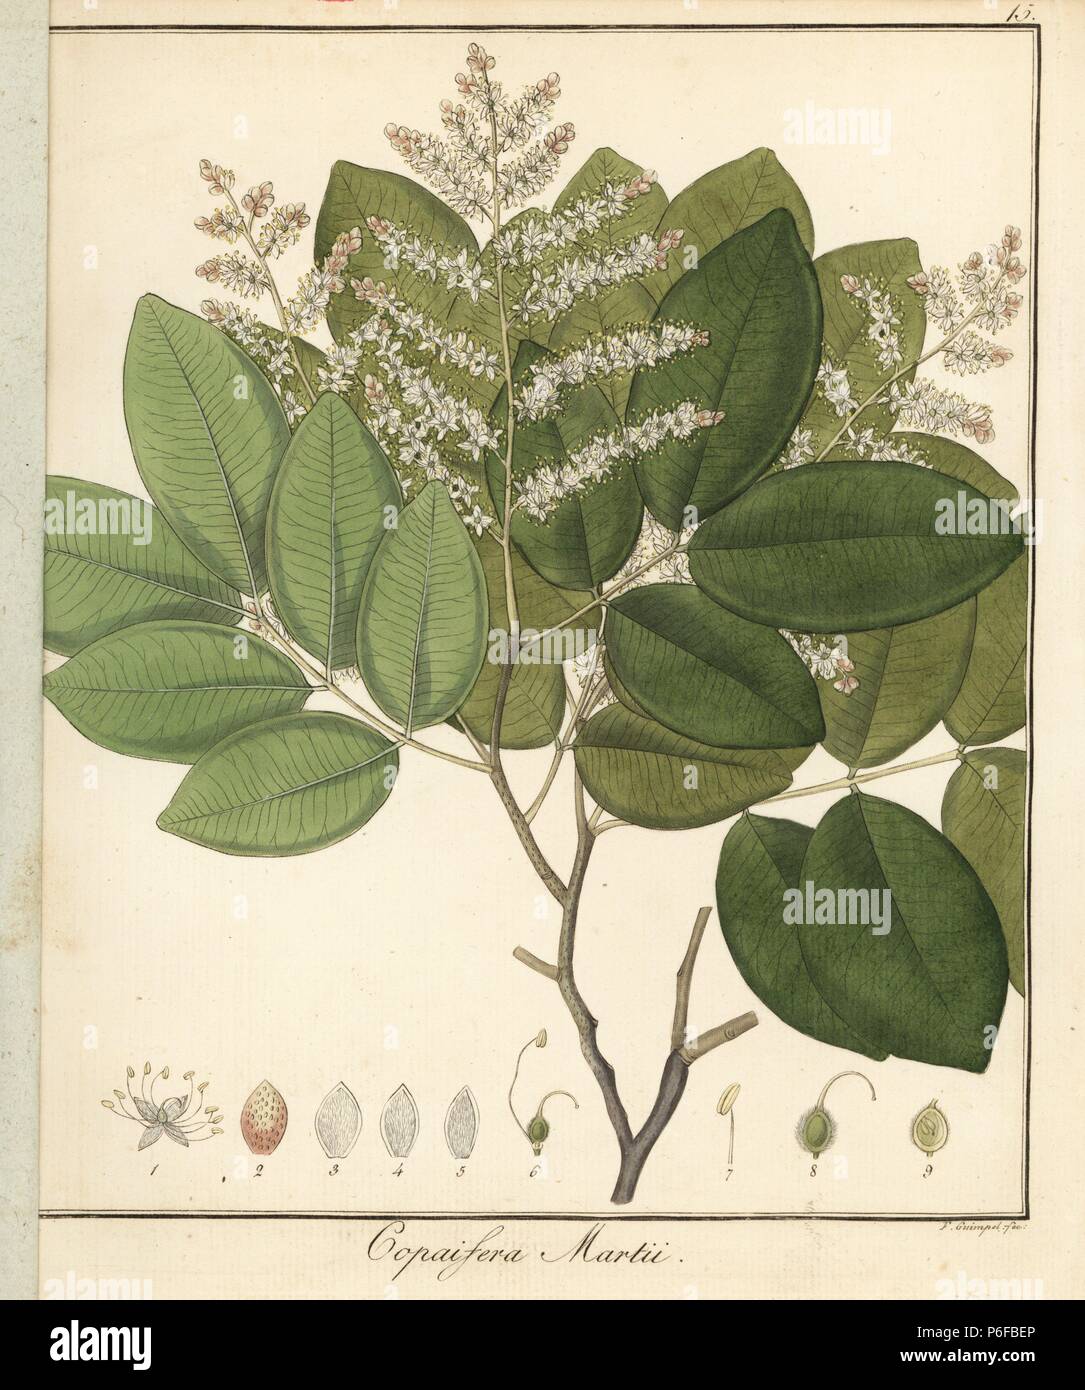 Copal or copaiba tree, Copaifera martii. Handcoloured copperplate engraving by F. Guimpel from Dr. Friedrich Gottlob Hayne's Medical Botany, Berlin, 1822. Hayne (1763-1832) was a German botanist, apothecary and professor of pharmaceutical botany at Berlin University. Stock Photo